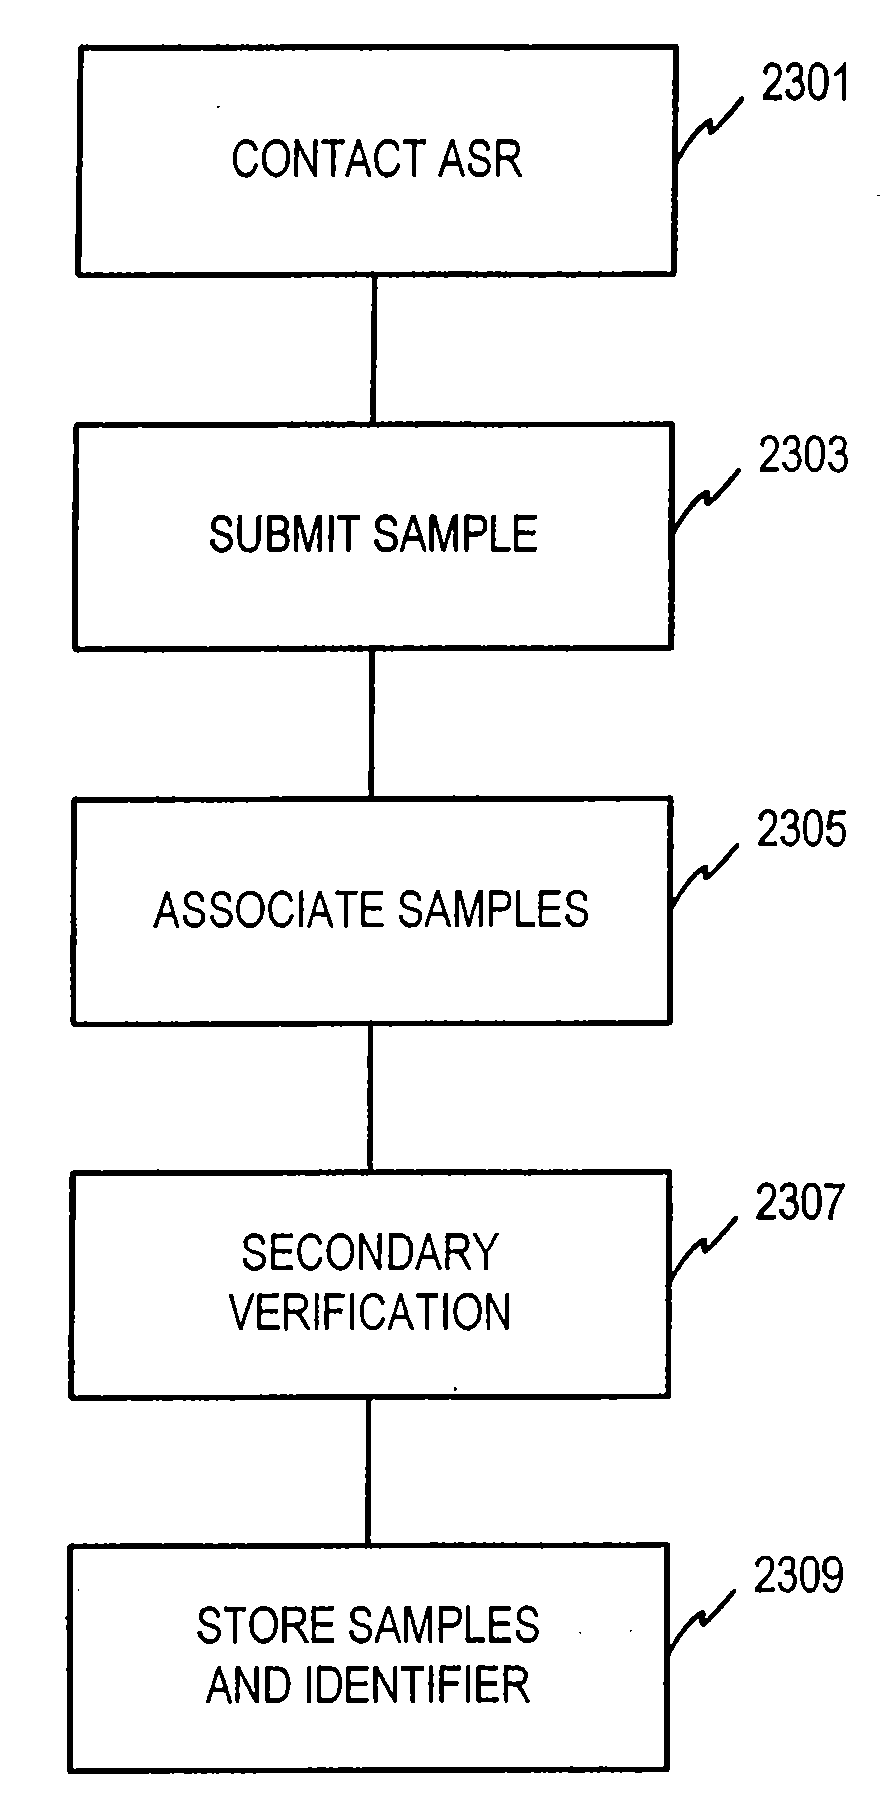 Method for registering a biometric for use with a smartcard